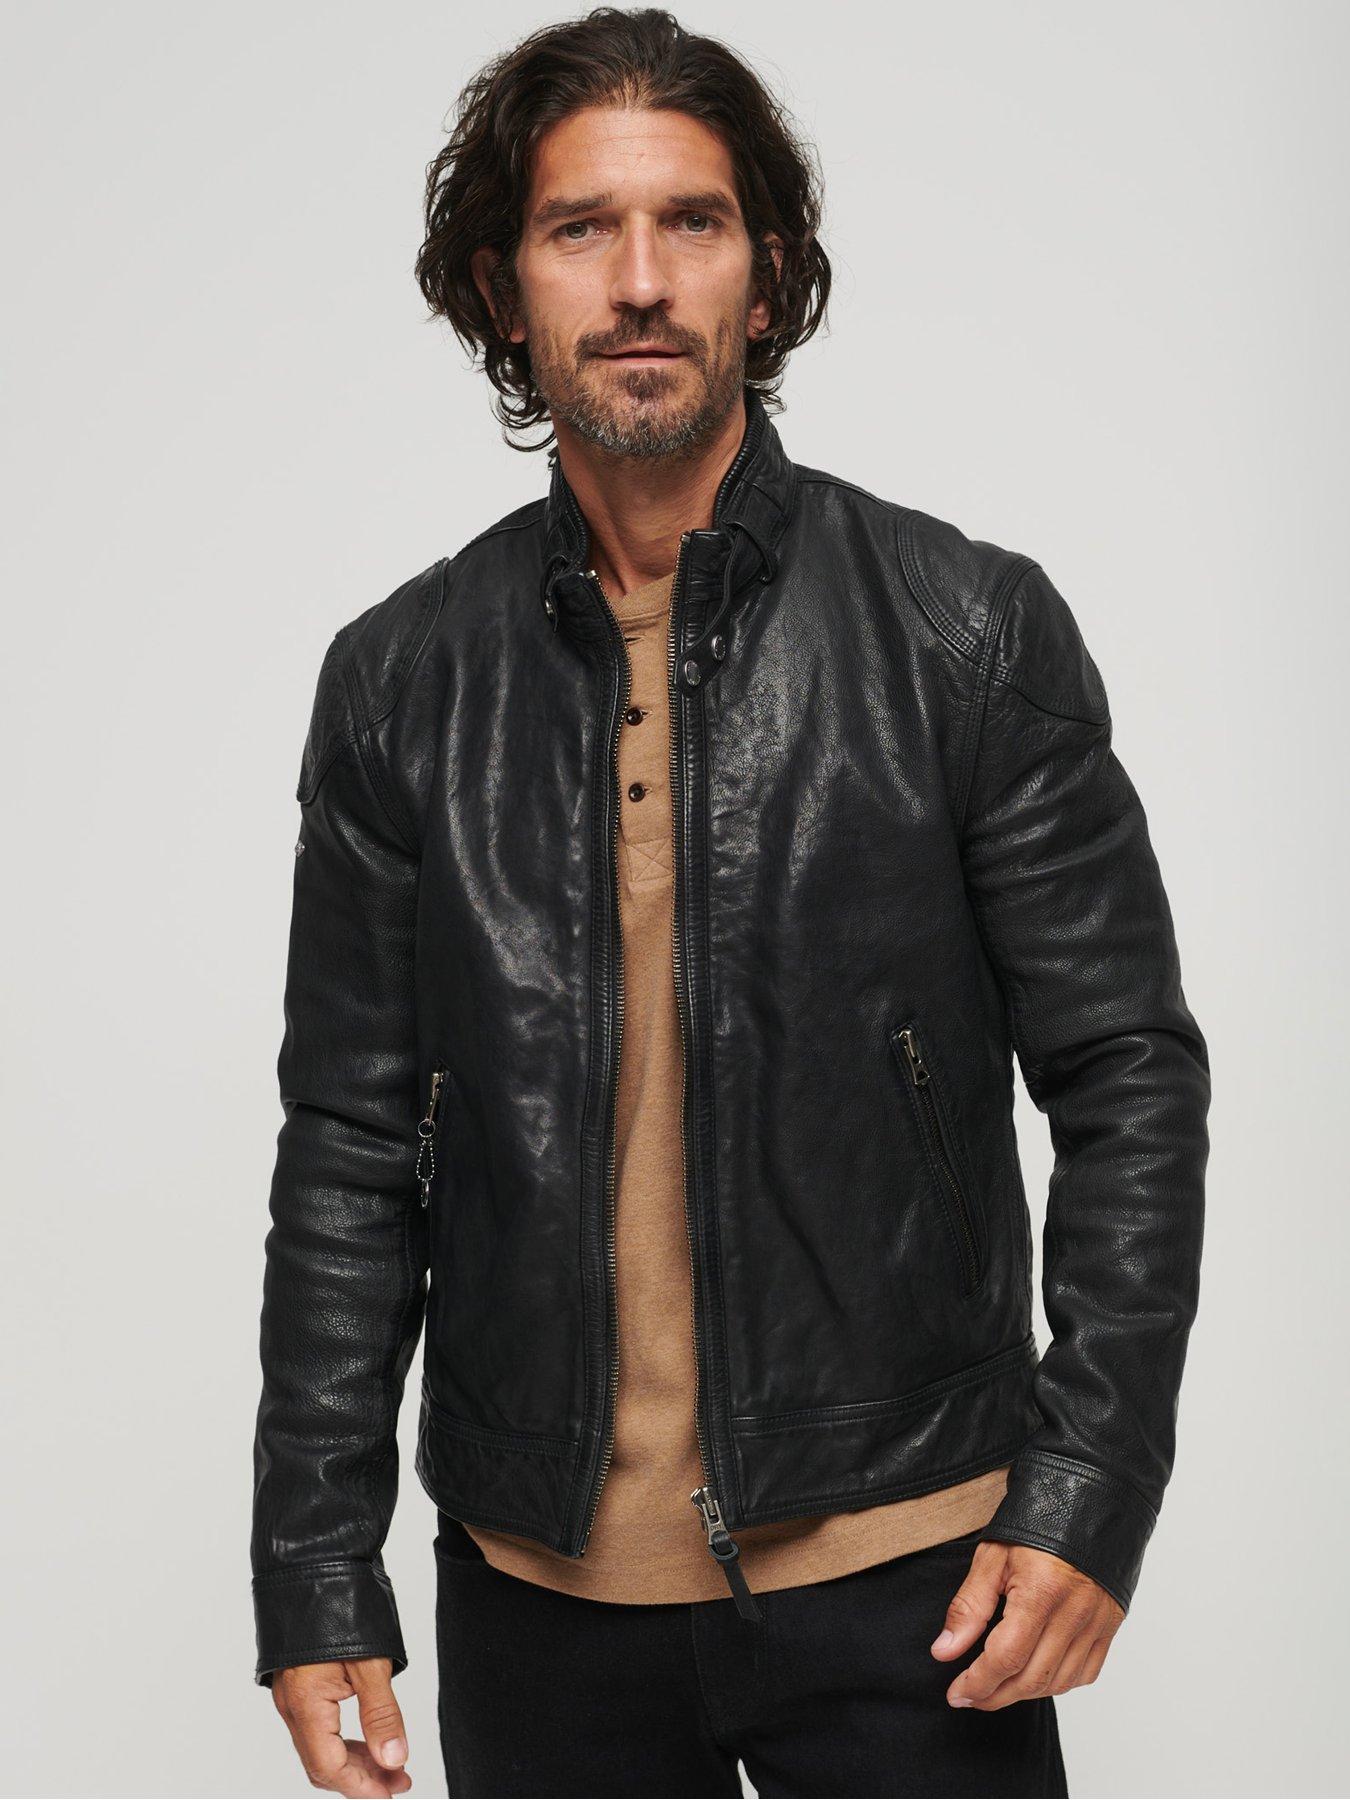 Mens Leather Black Jacket at Rs.690/Piece in delhi offer by MZ Fashion